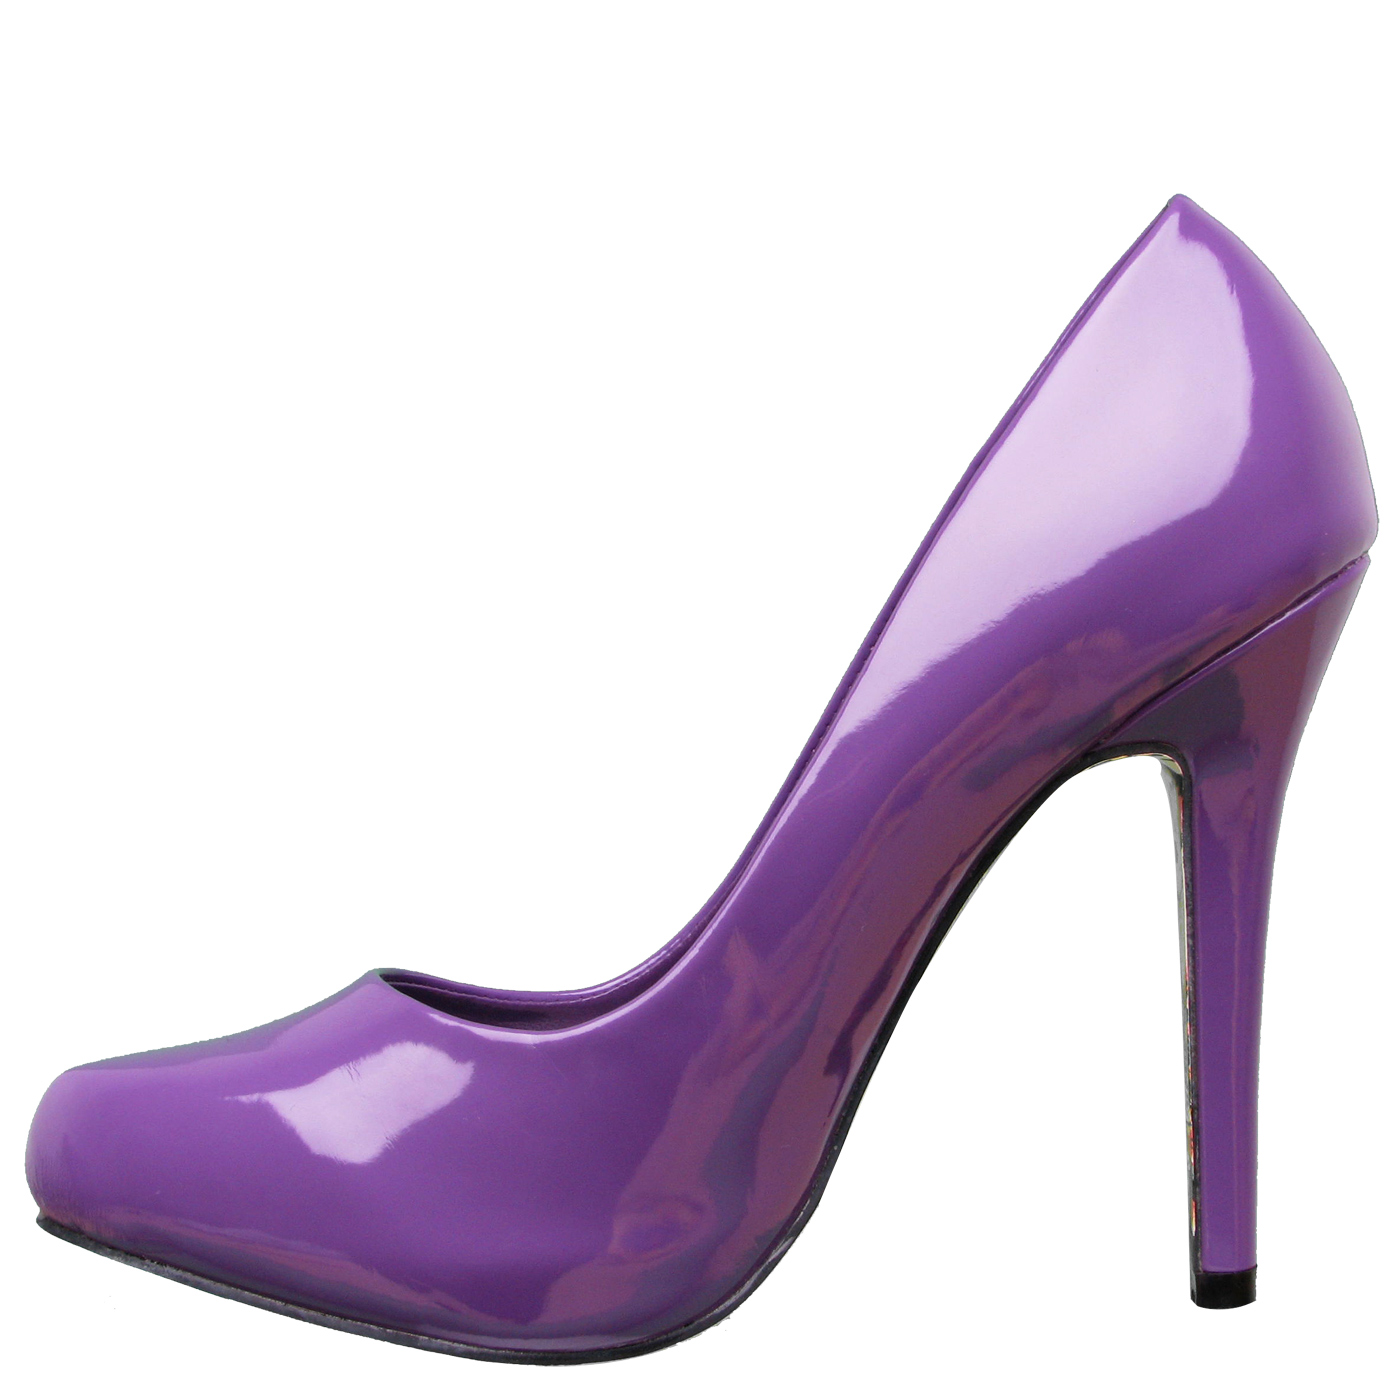 Purple Pumps: What Colors to Wear With It